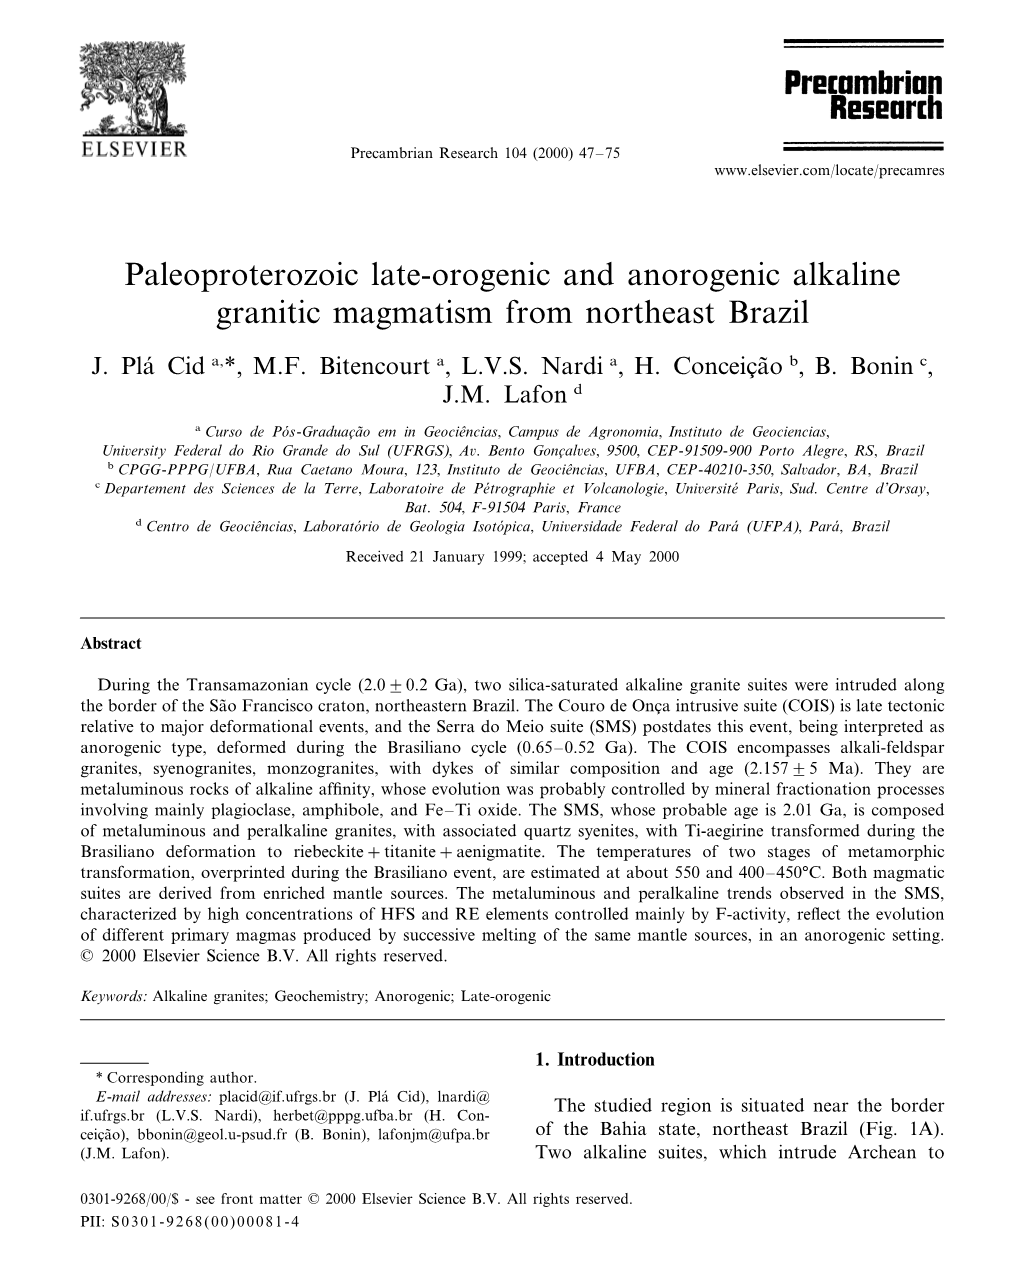 Paleoproterozoic Late-Orogenic and Anorogenic Alkaline Granitic Magmatism from Northeast Brazil